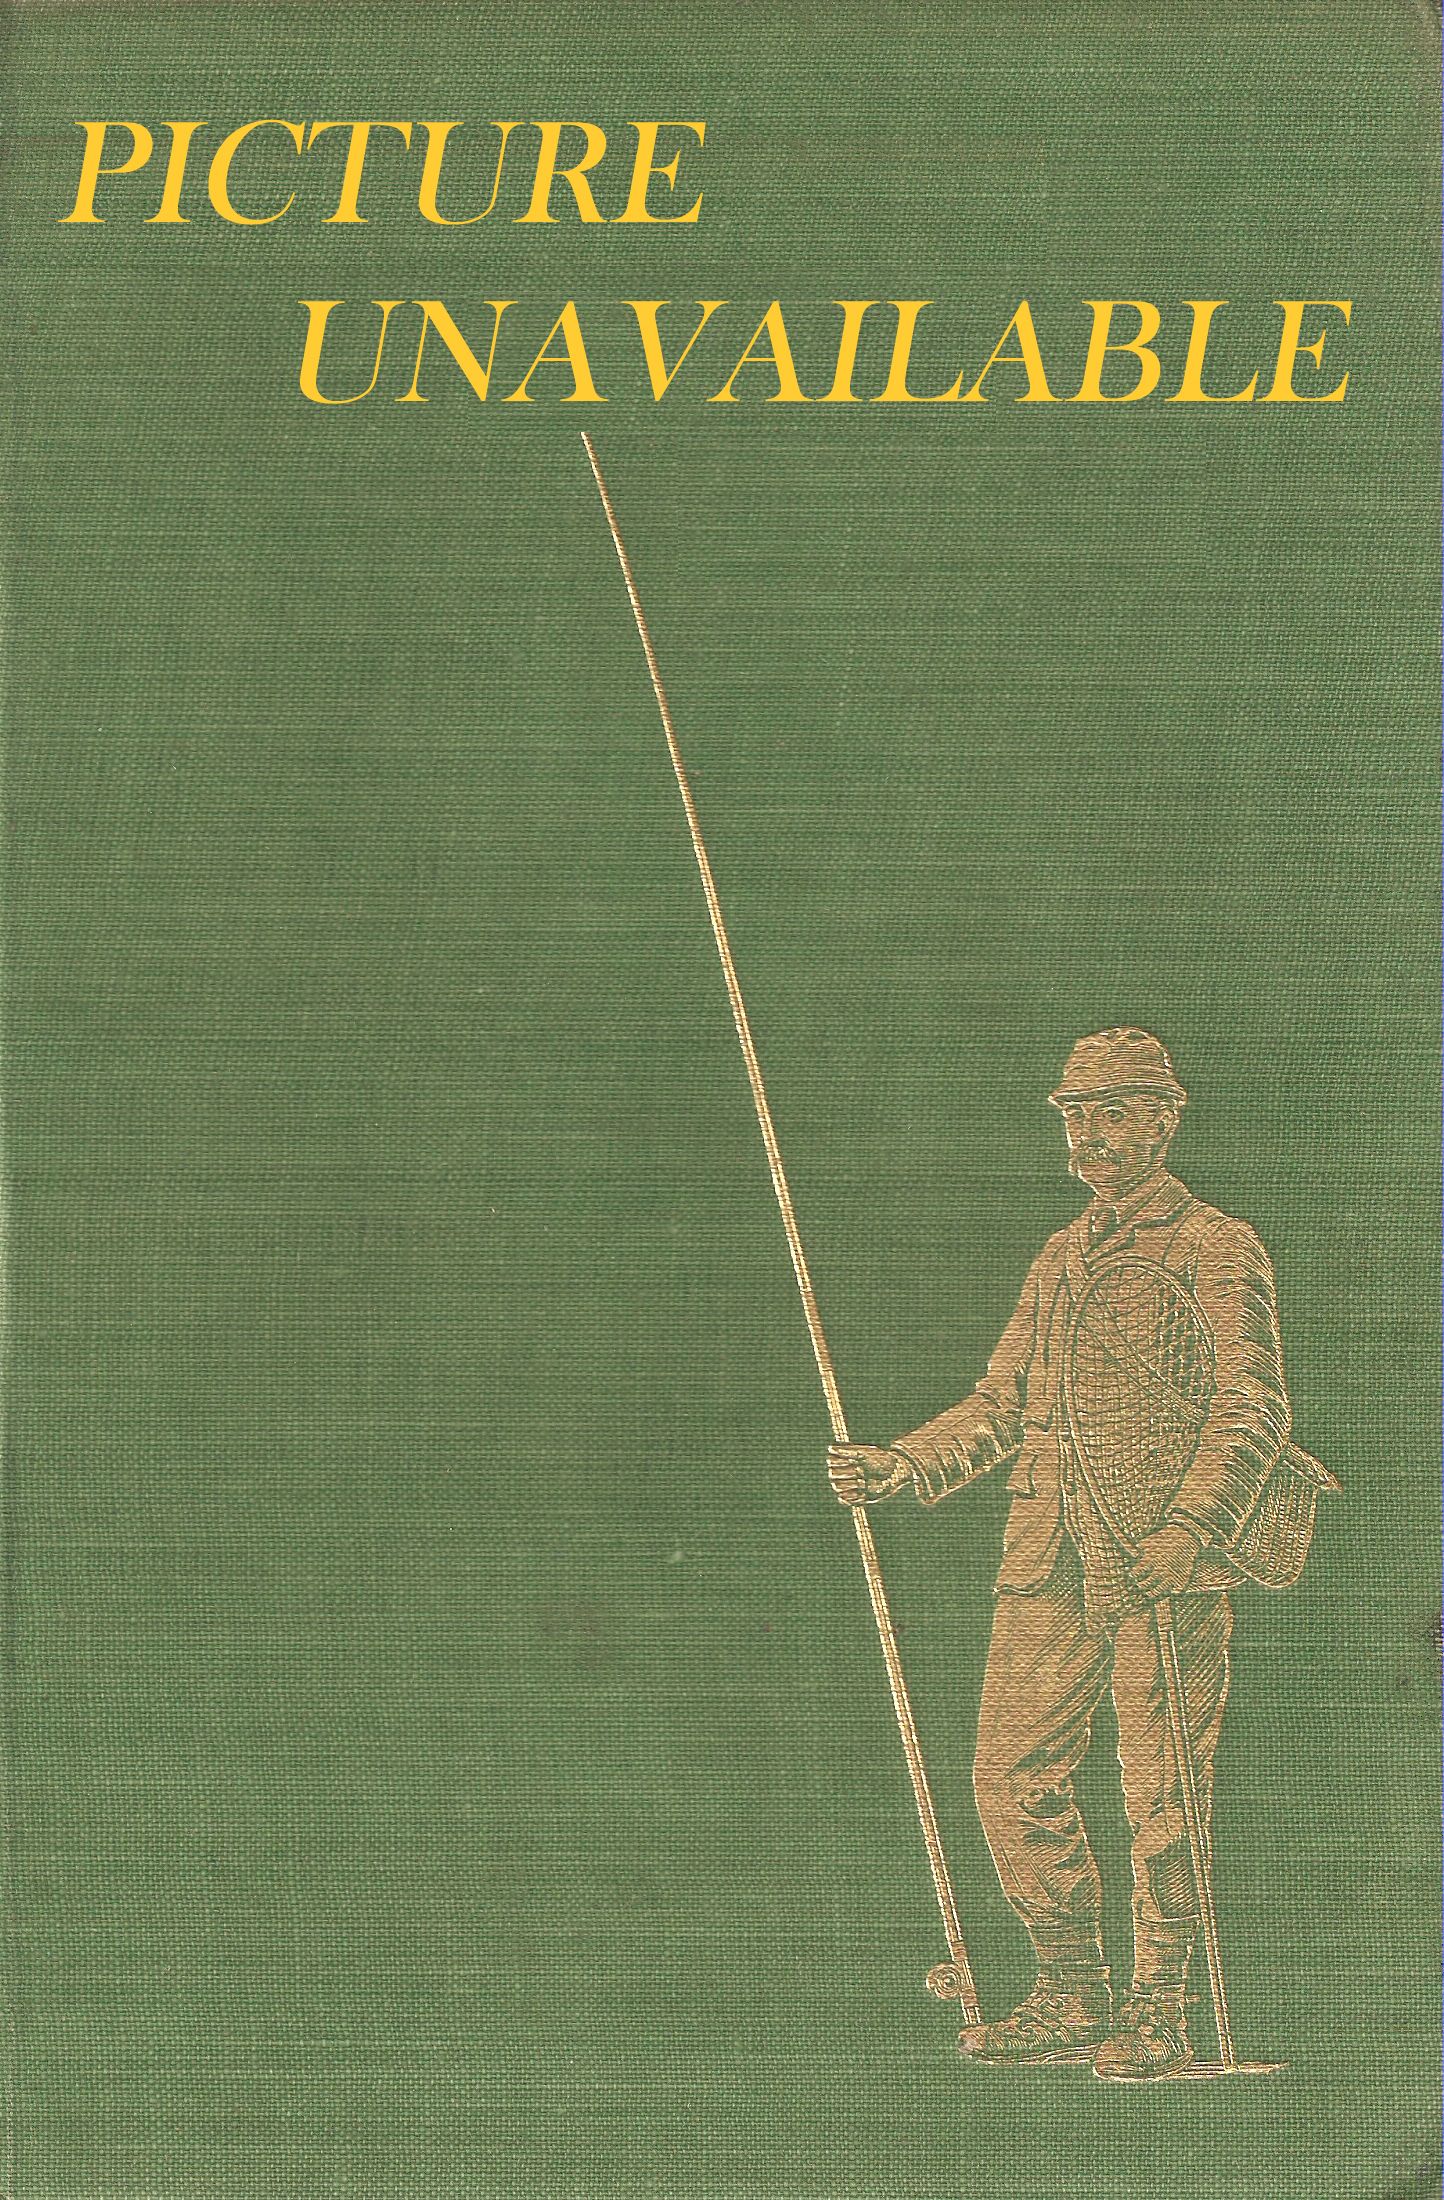 WILLIAM WHITE OF CRICKHOWELL, and his unpublished Catalogue of all the  Books that have been published on the Art of Angling. By Ken Callahan.